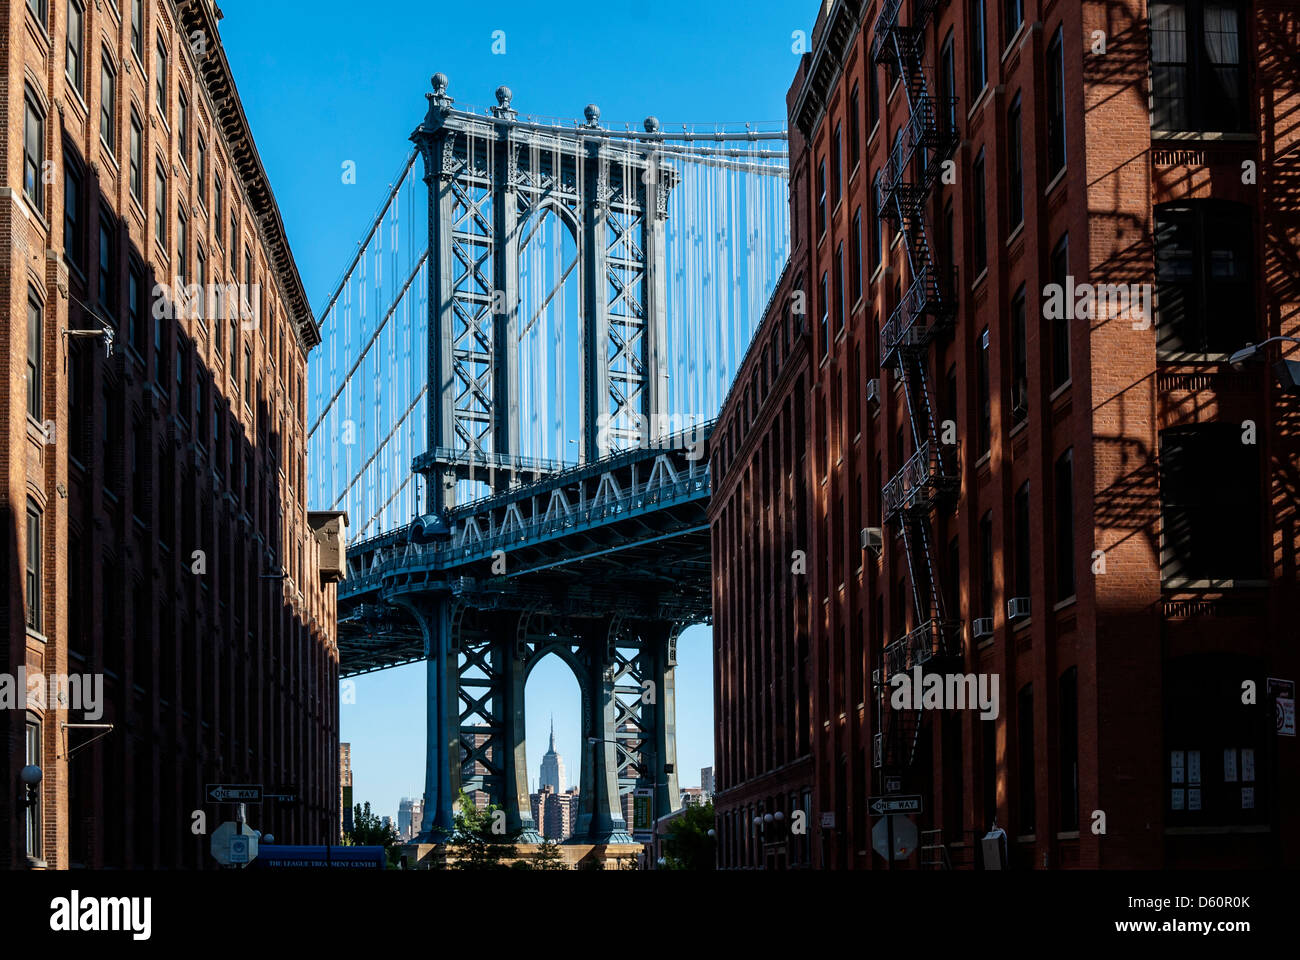 Manhattan Bridge, view from Brooklyn Heights, New York, United States of America - Image taken from public ground Stock Photo